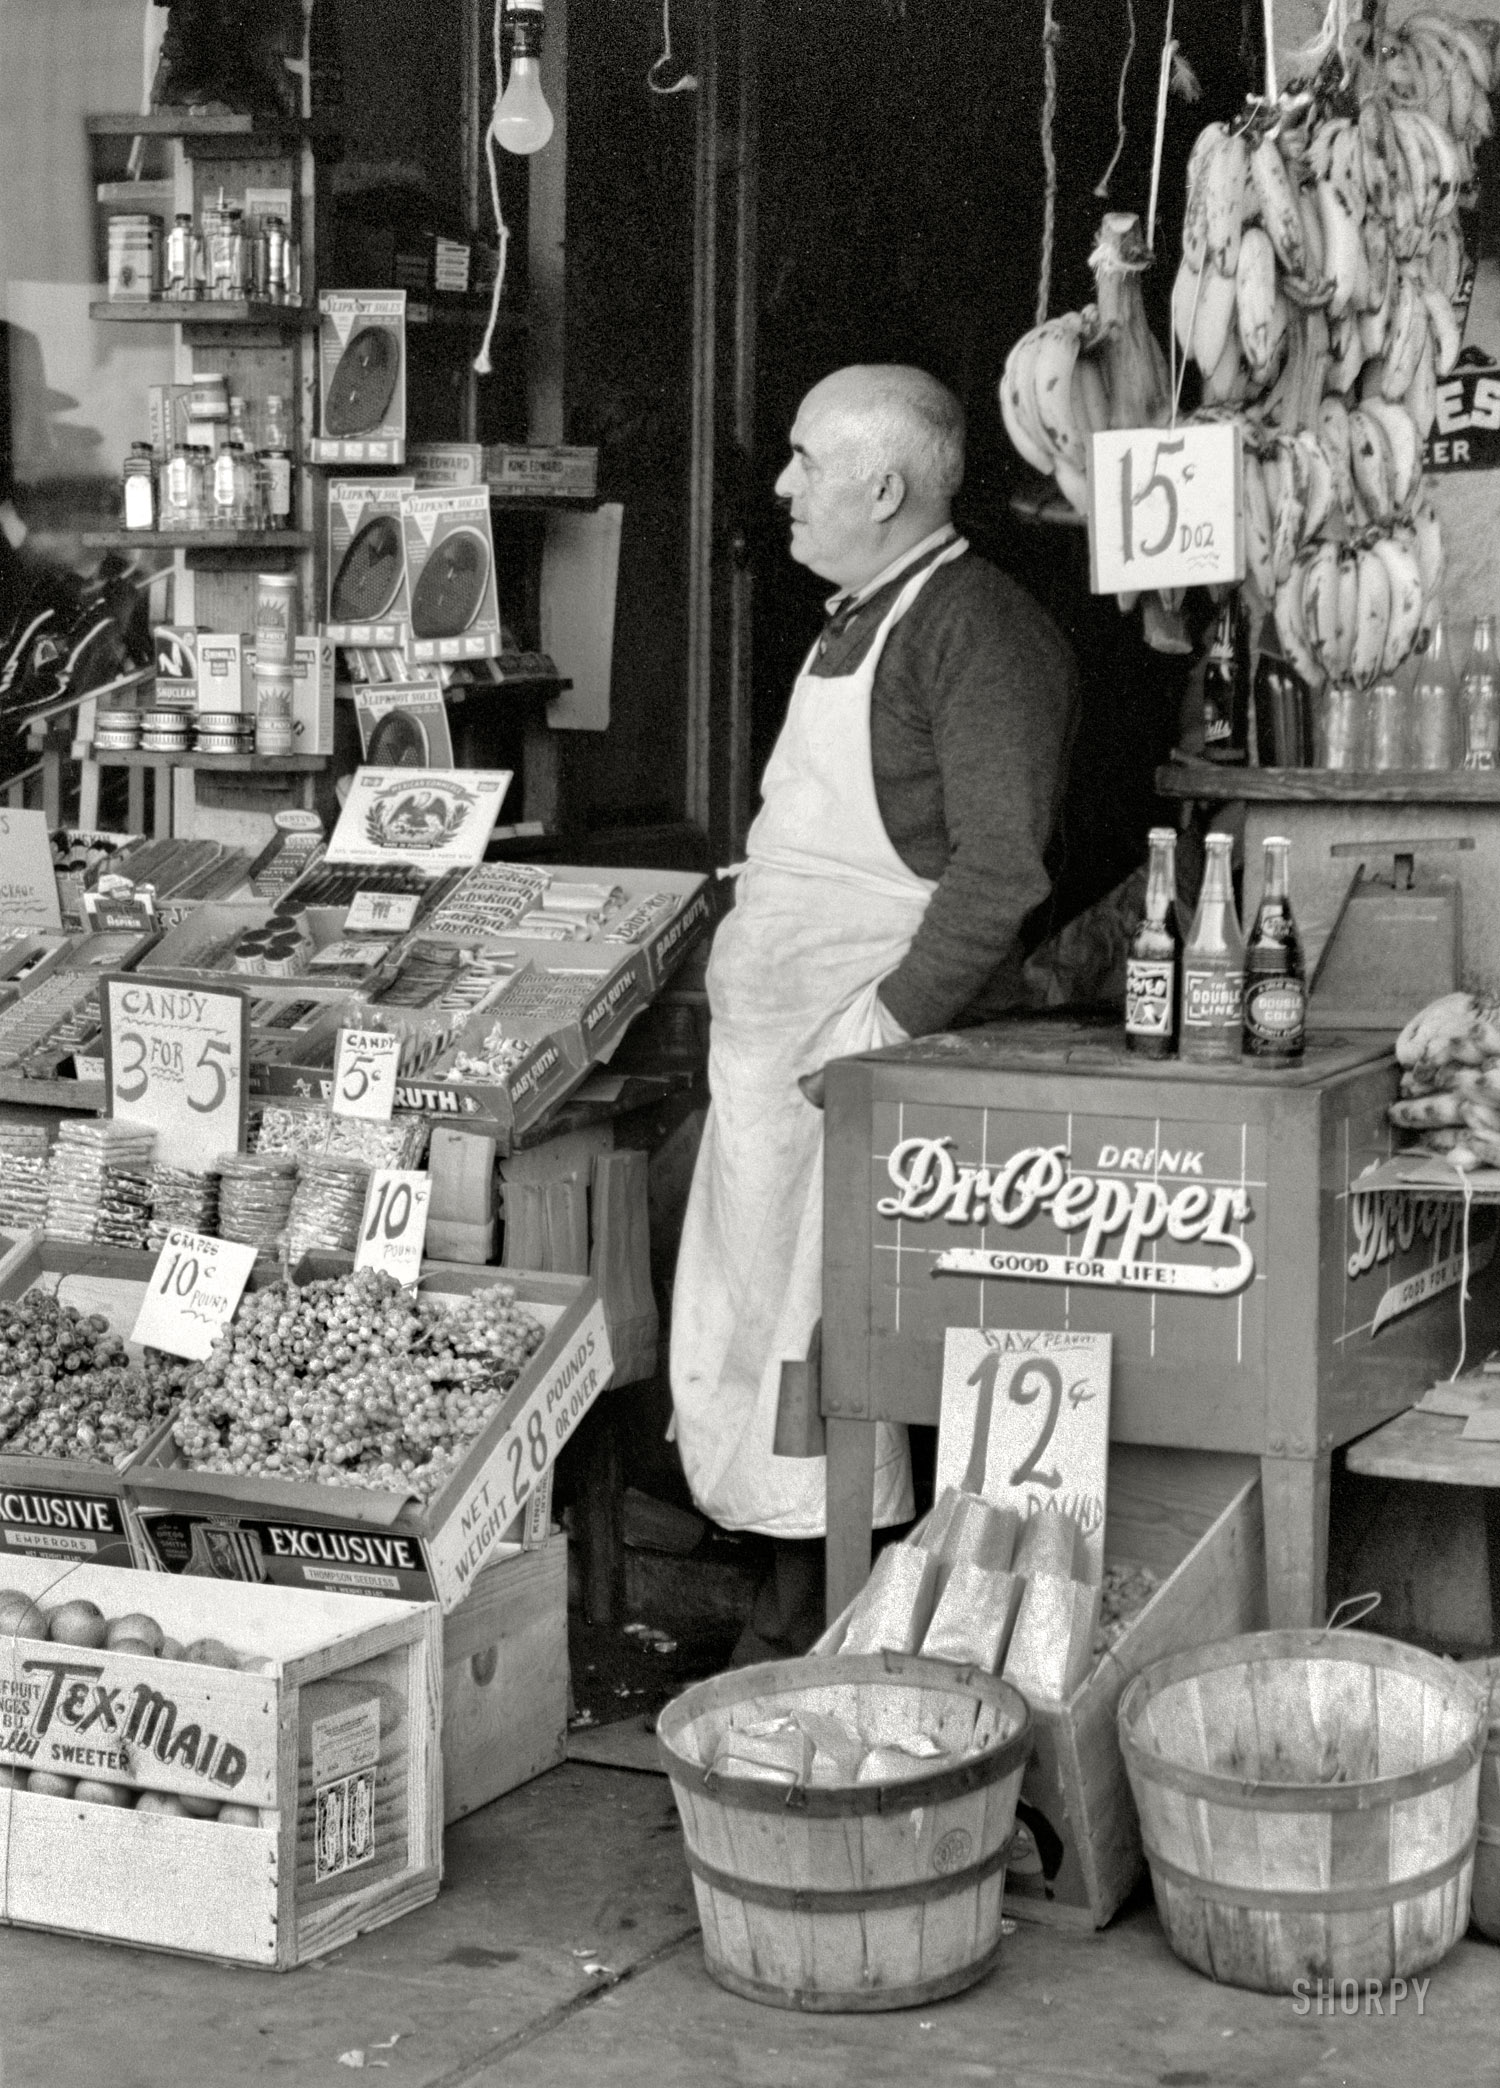 November 1939. Waco, Texas. "Proprietor of small store in market square." Pop bottles on the cooler: Woosies, Double Line and Double Cola. 35mm nitrate negative by Russell Lee for the Farm Security Administration. View full size.